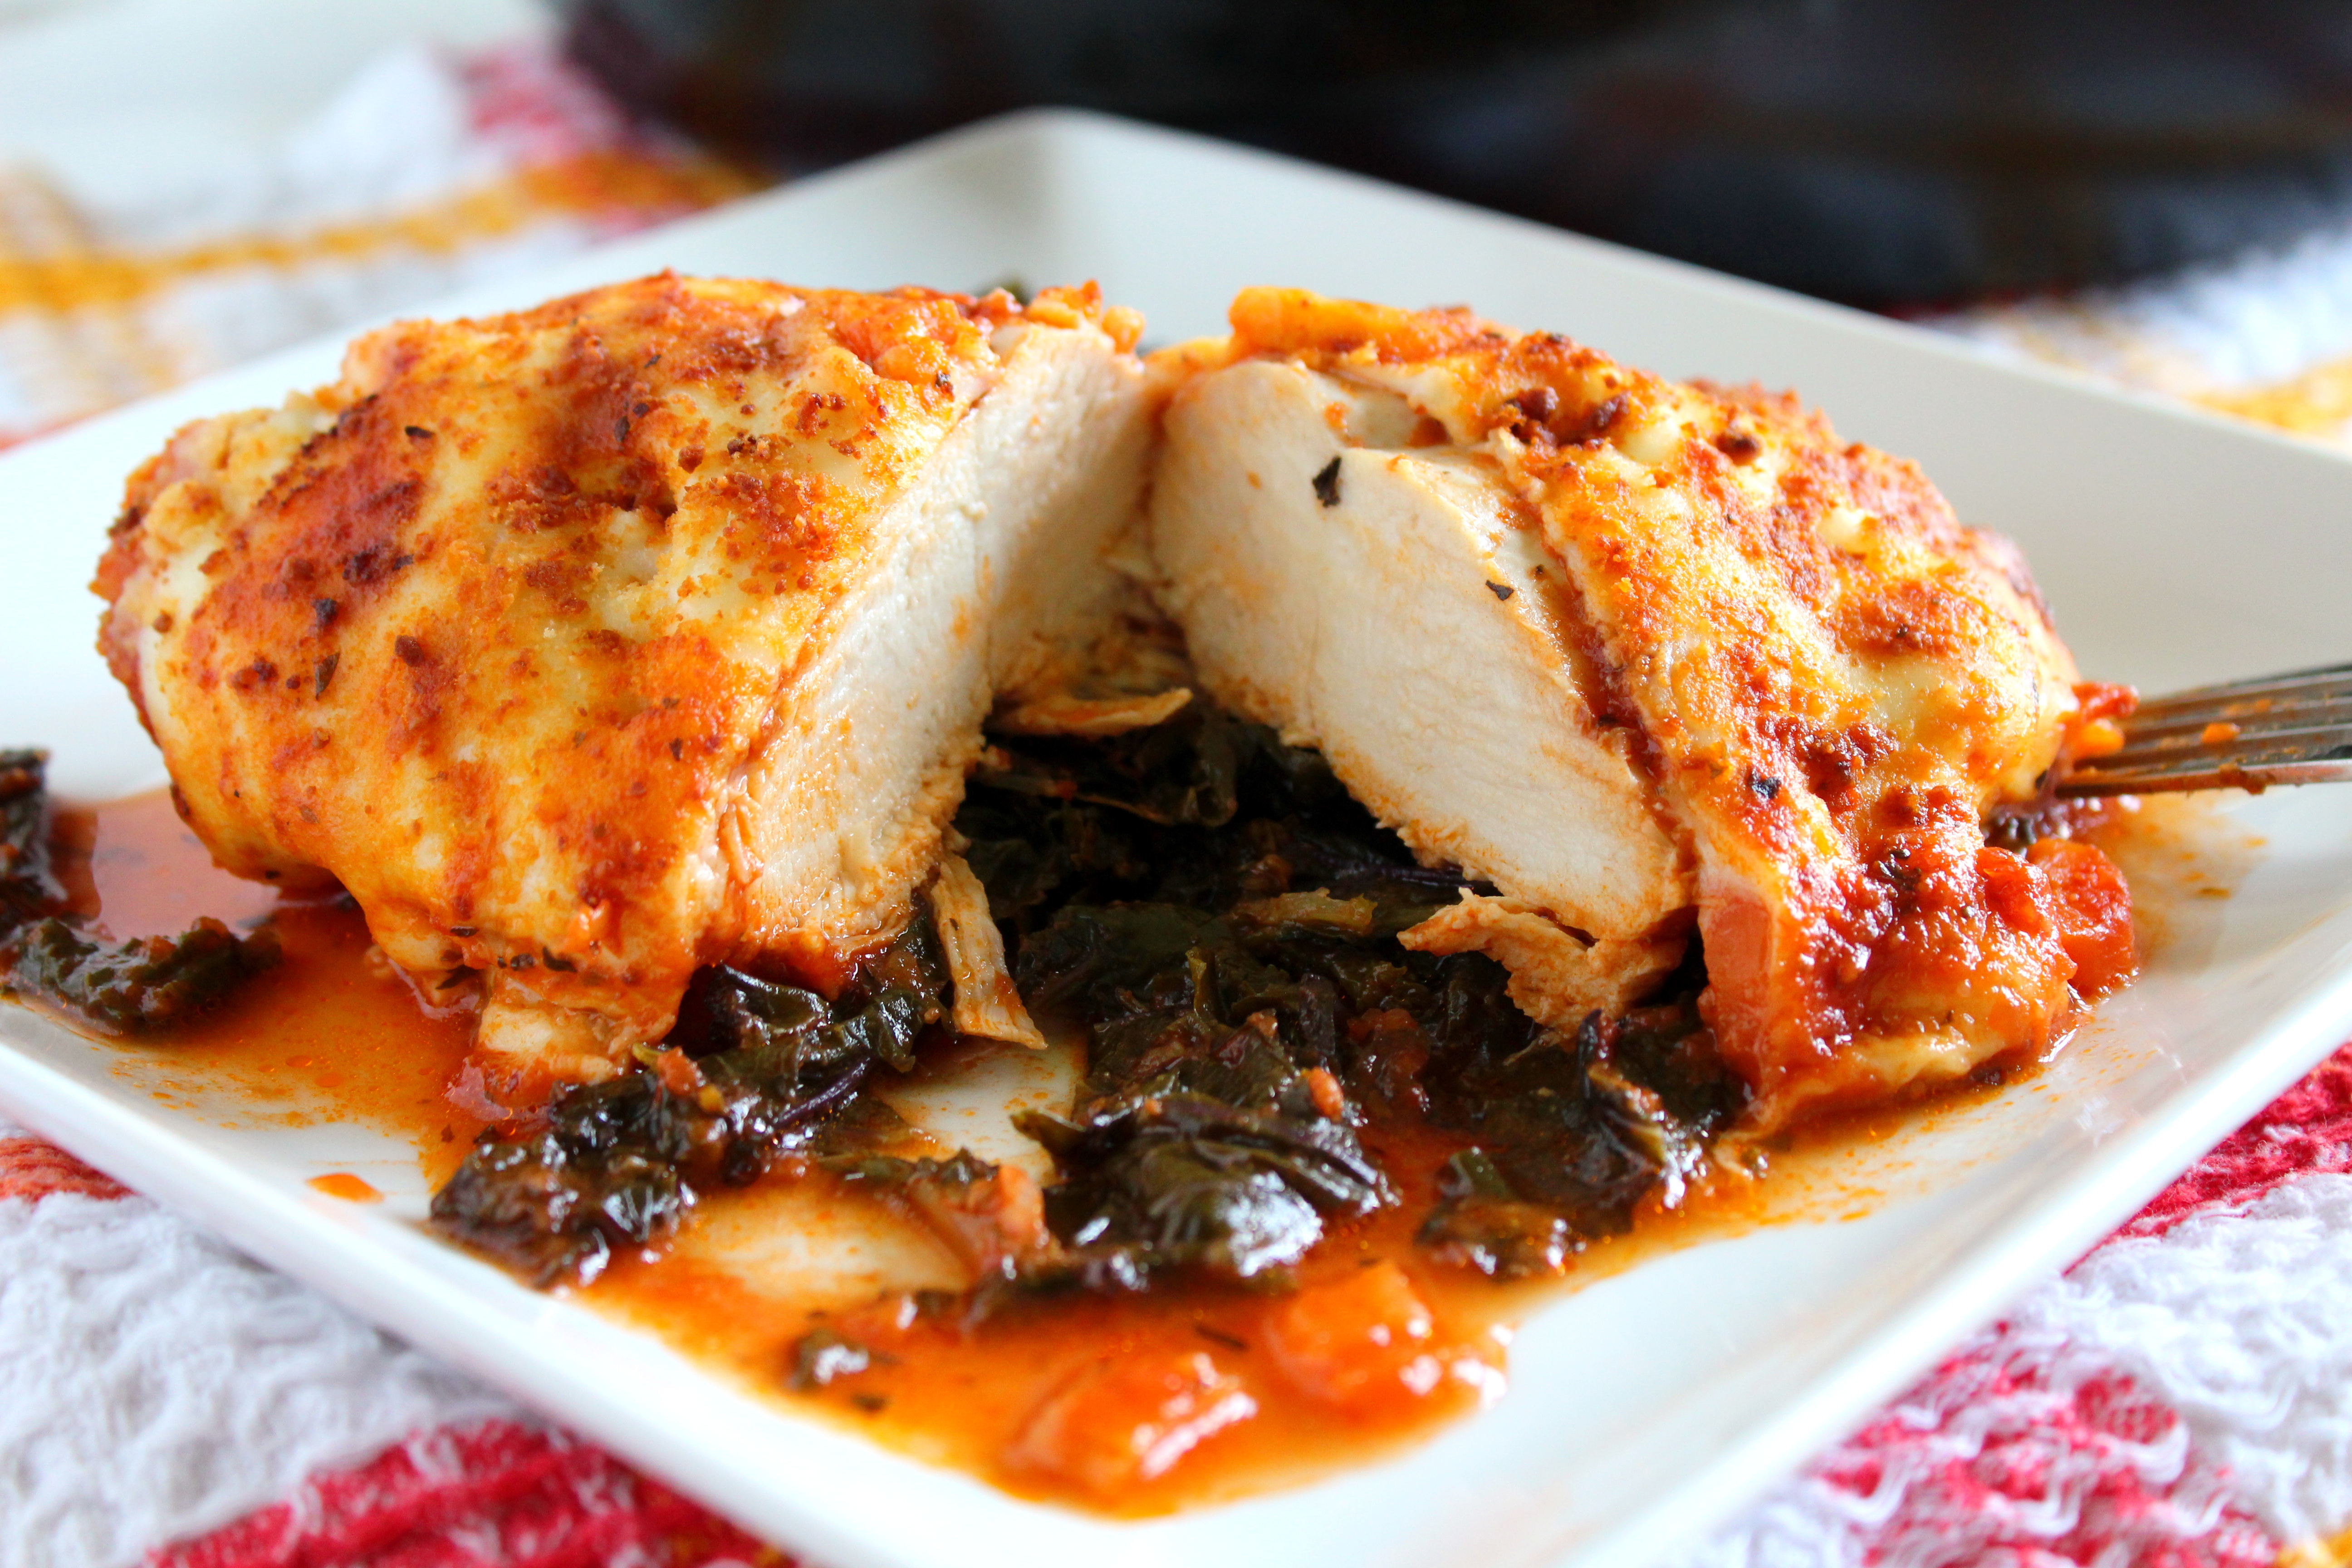 Chicken with Kale